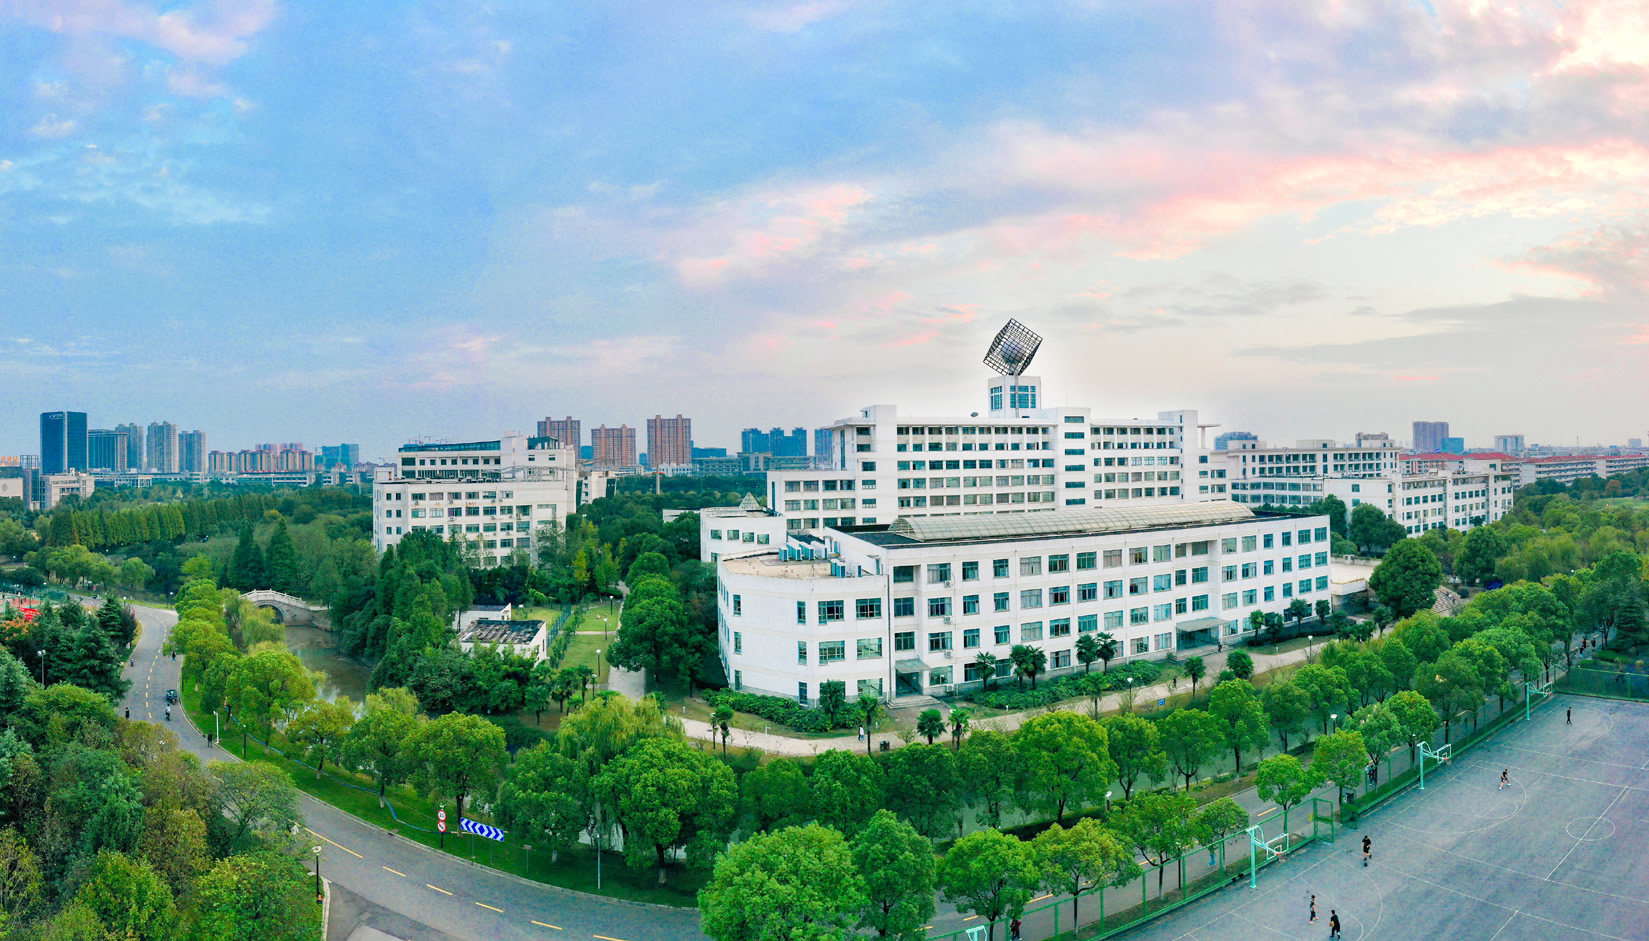 ​Changzhou University uses technology to turn waste into wealth